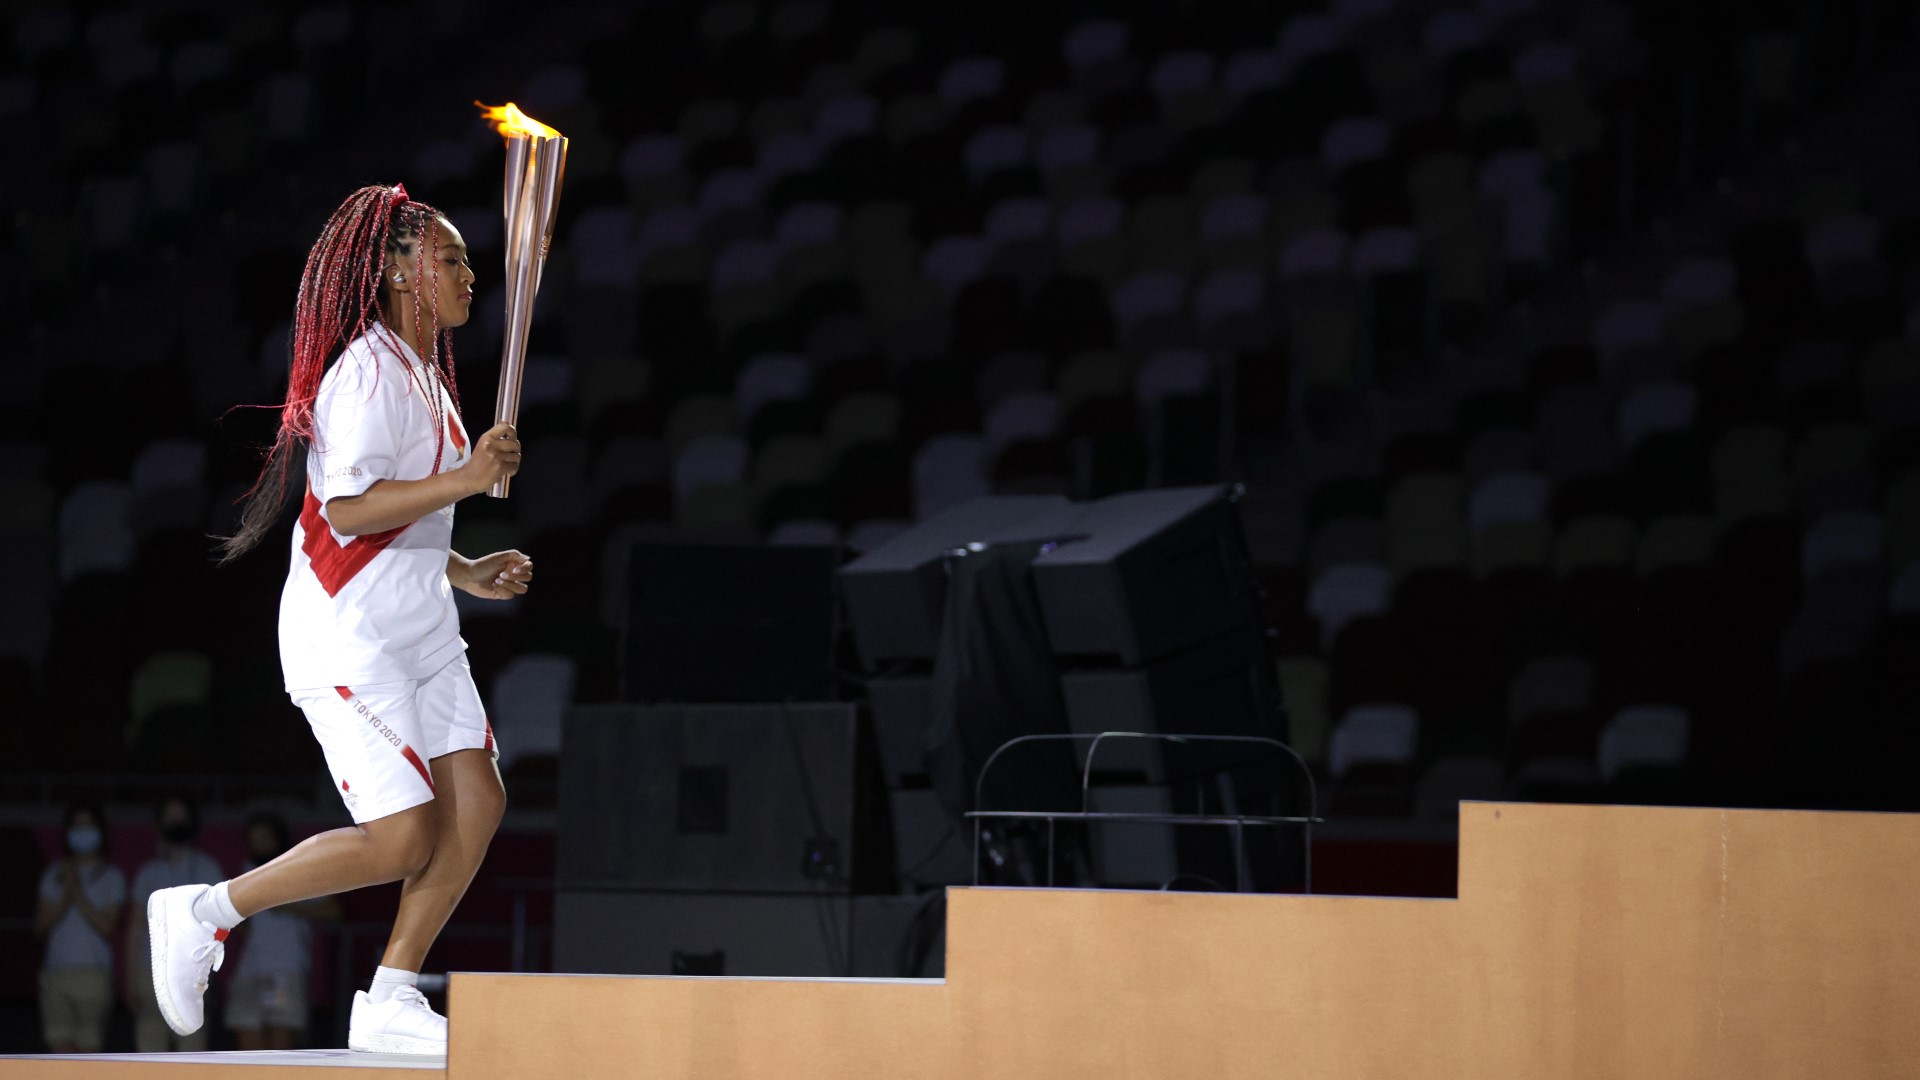 Tennis star Naomi Osaka lit the Olympic Cauldron for the Tokyo Olympics. The American with dual citizenship is competing for Tokyo in the games.